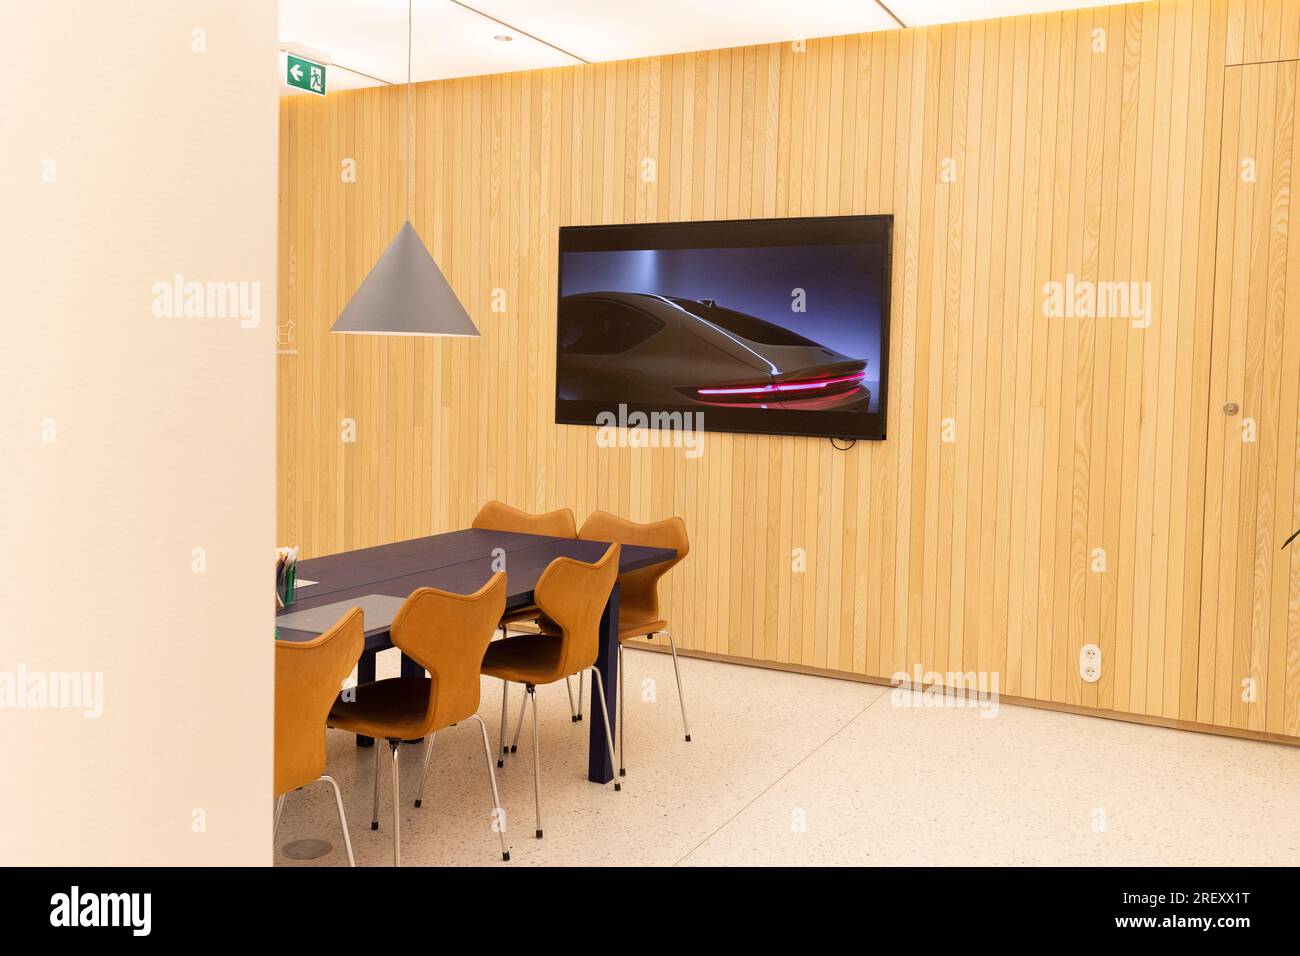 Oslo, Norway. July 27th, 2023. The NIO cafe and showroom in Oslo, Norway. Six EP9s have been sold to NIO investors for £2.5 million each. Credit: Katie Collins/Alamy Stock Photo